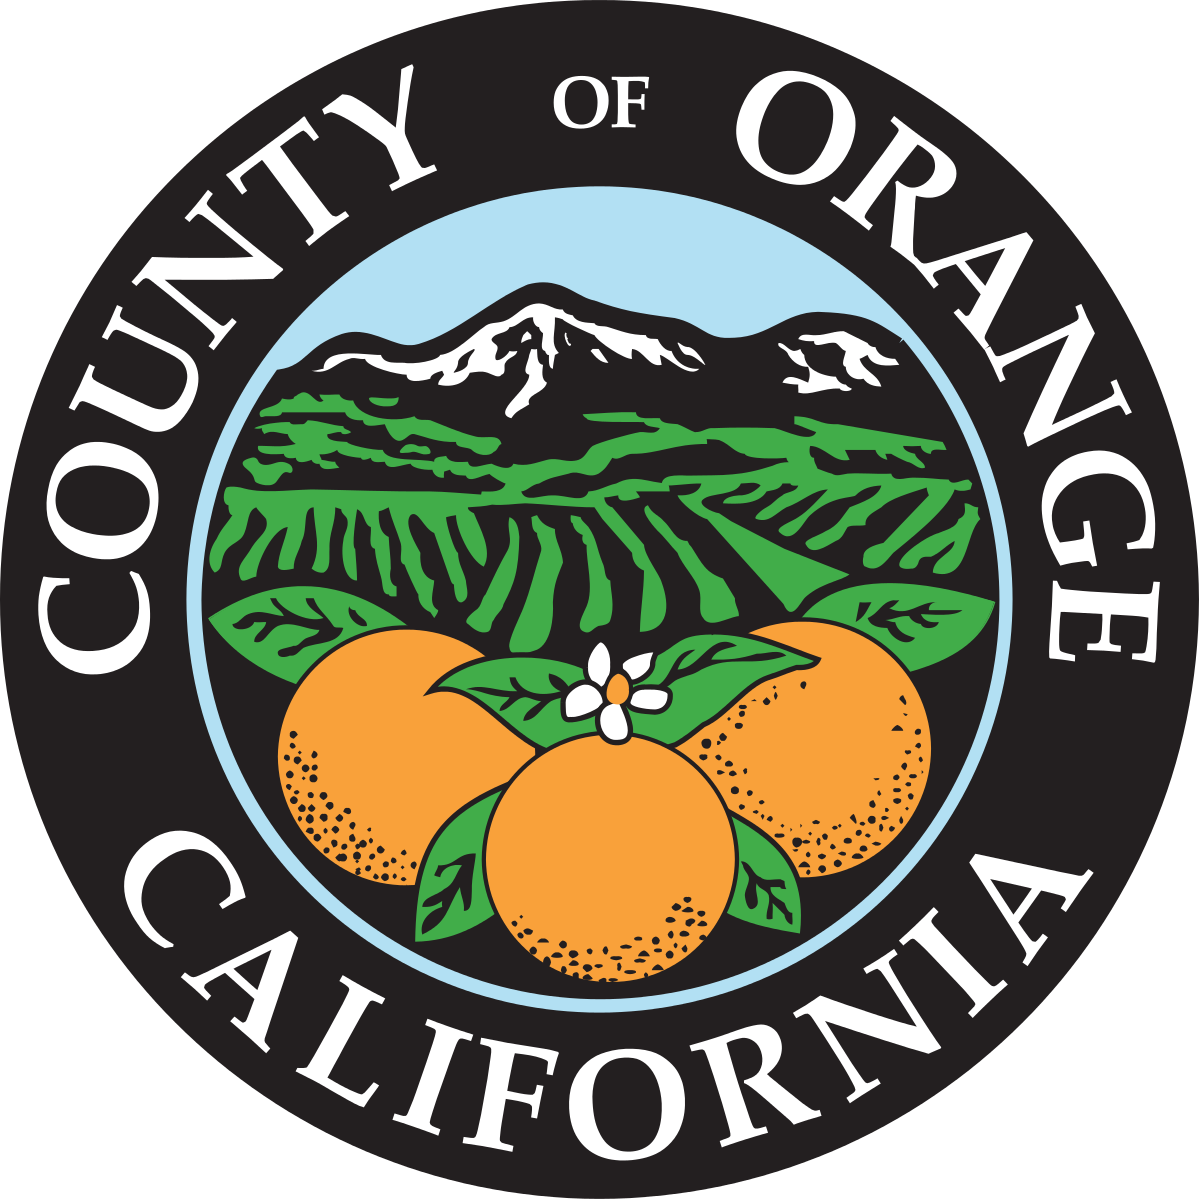 1200px-Seal_of_Orange_County,_California.svg.png